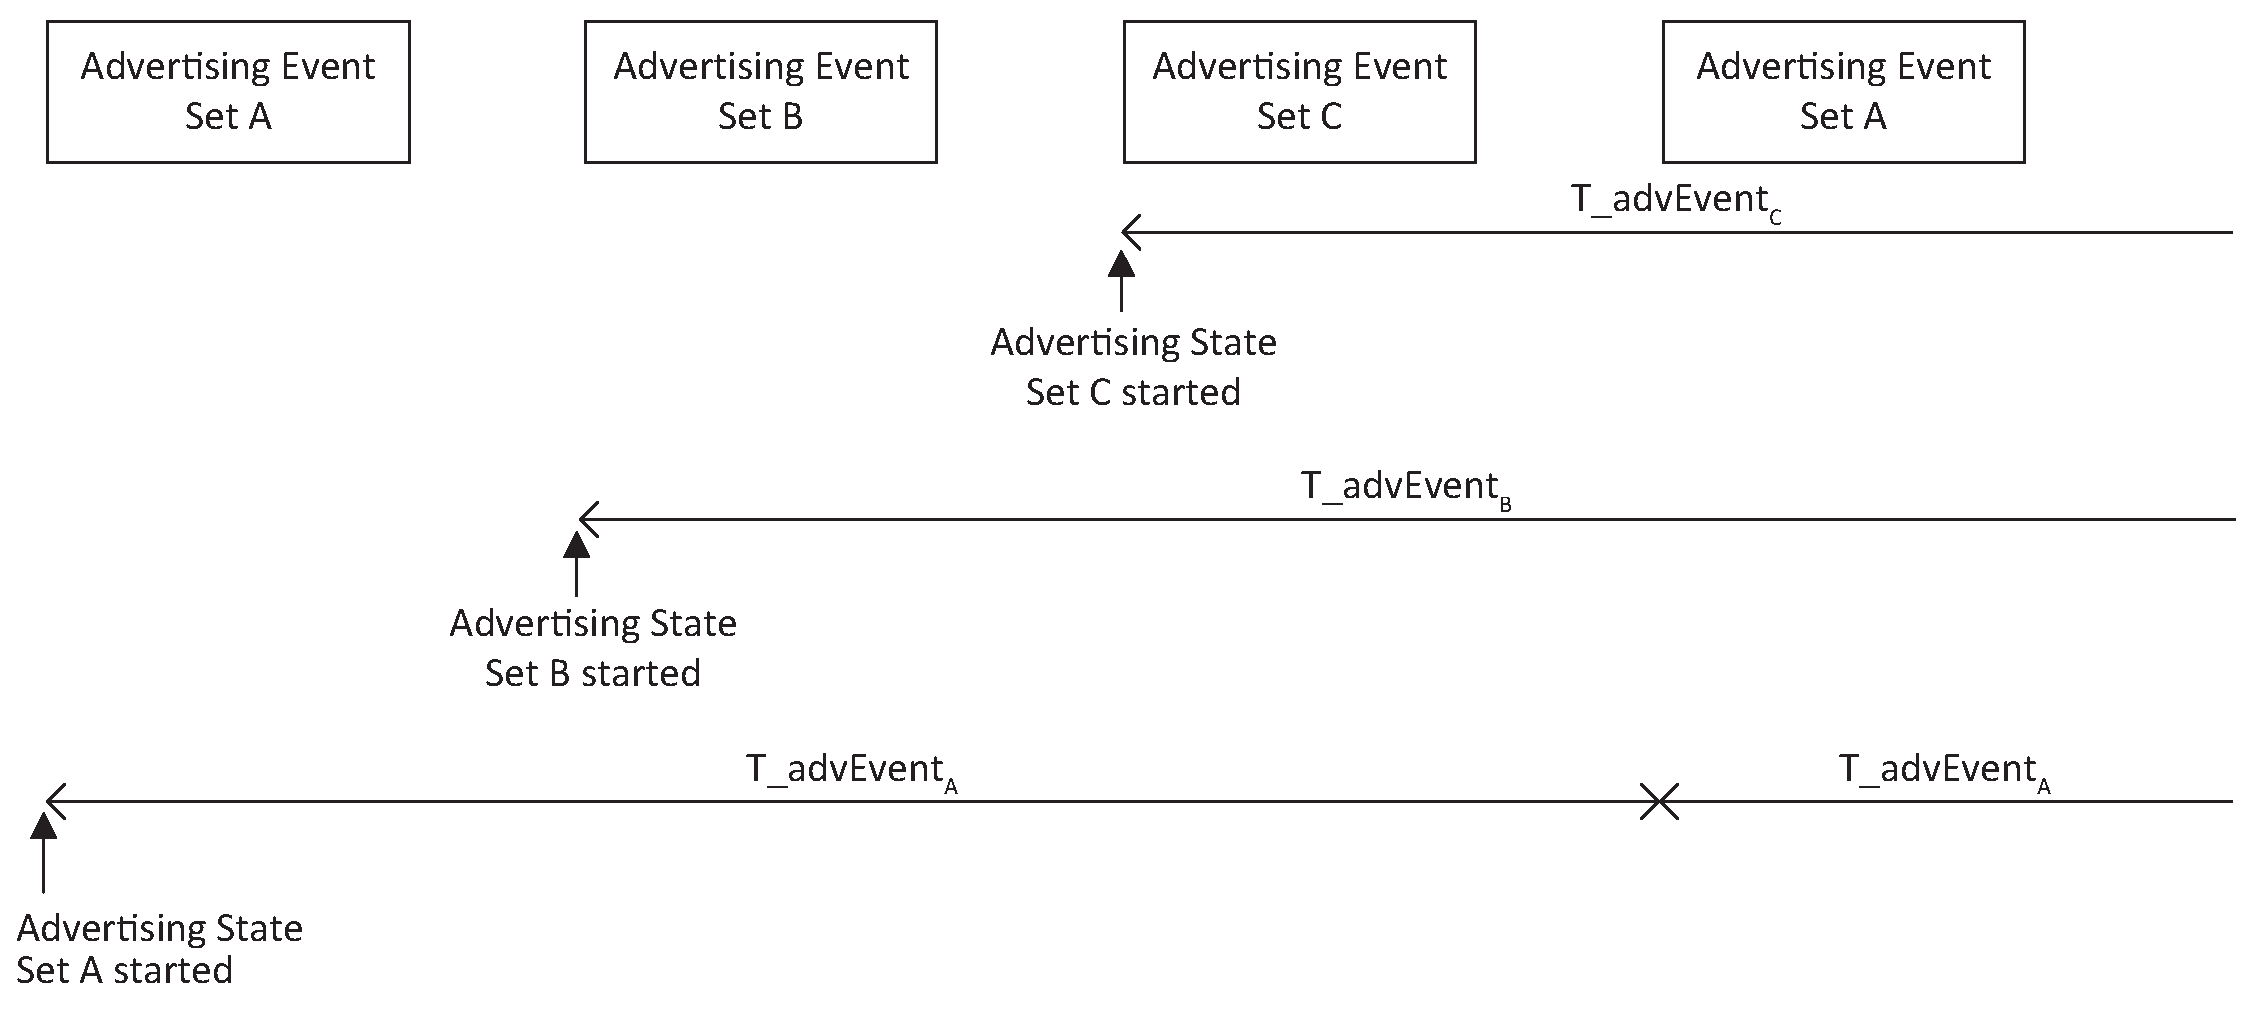 Multiple advertising sets example